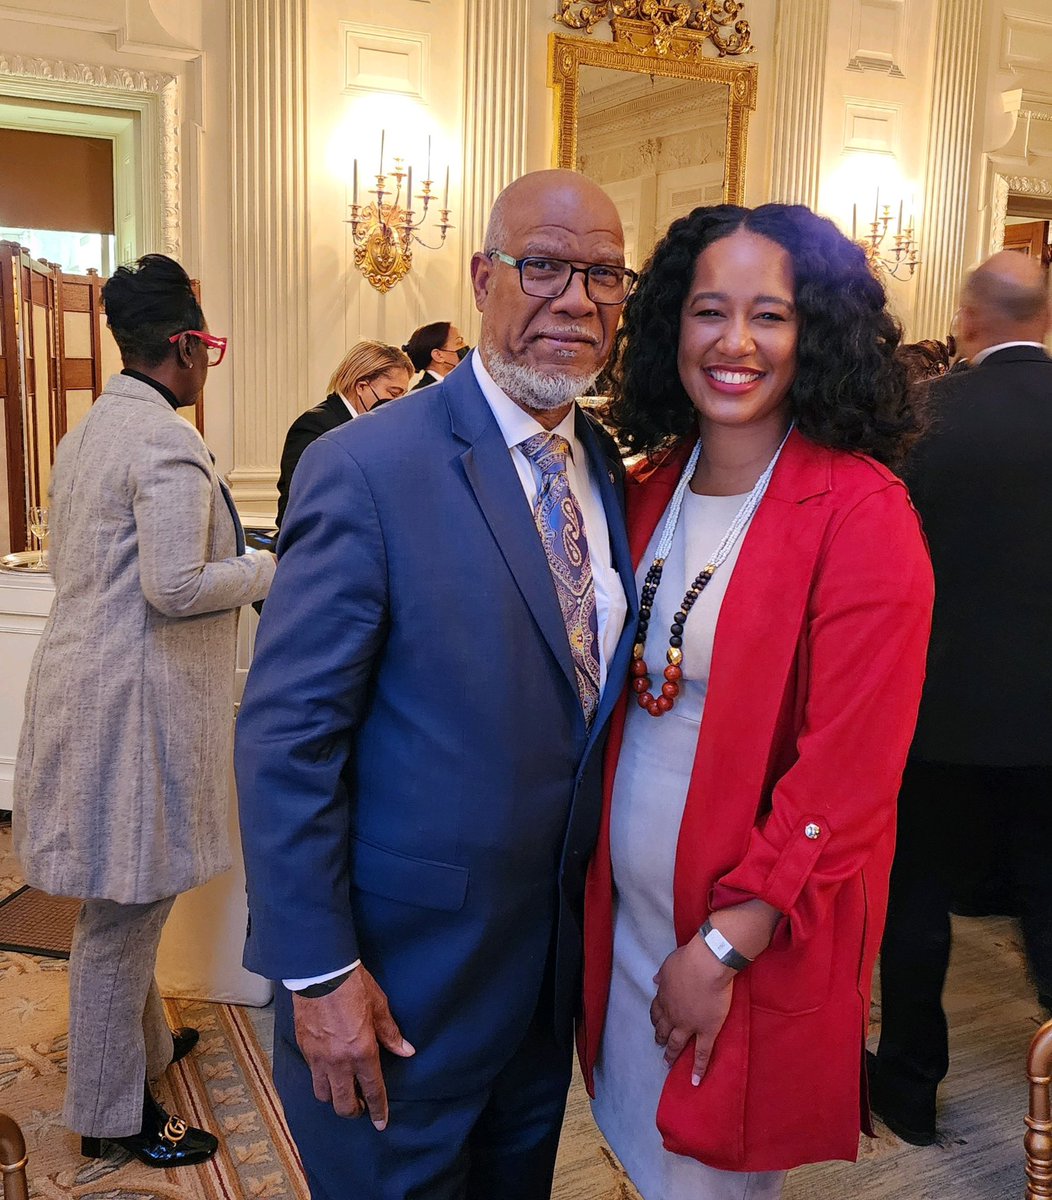 What an honor to celebrate Black History Month at the White House with advocates, influencers, and community leaders across our nation! But just because the month’s over, doesn’t stop our work for justice, dignity, and opportunity. #BlackHistoryMatters